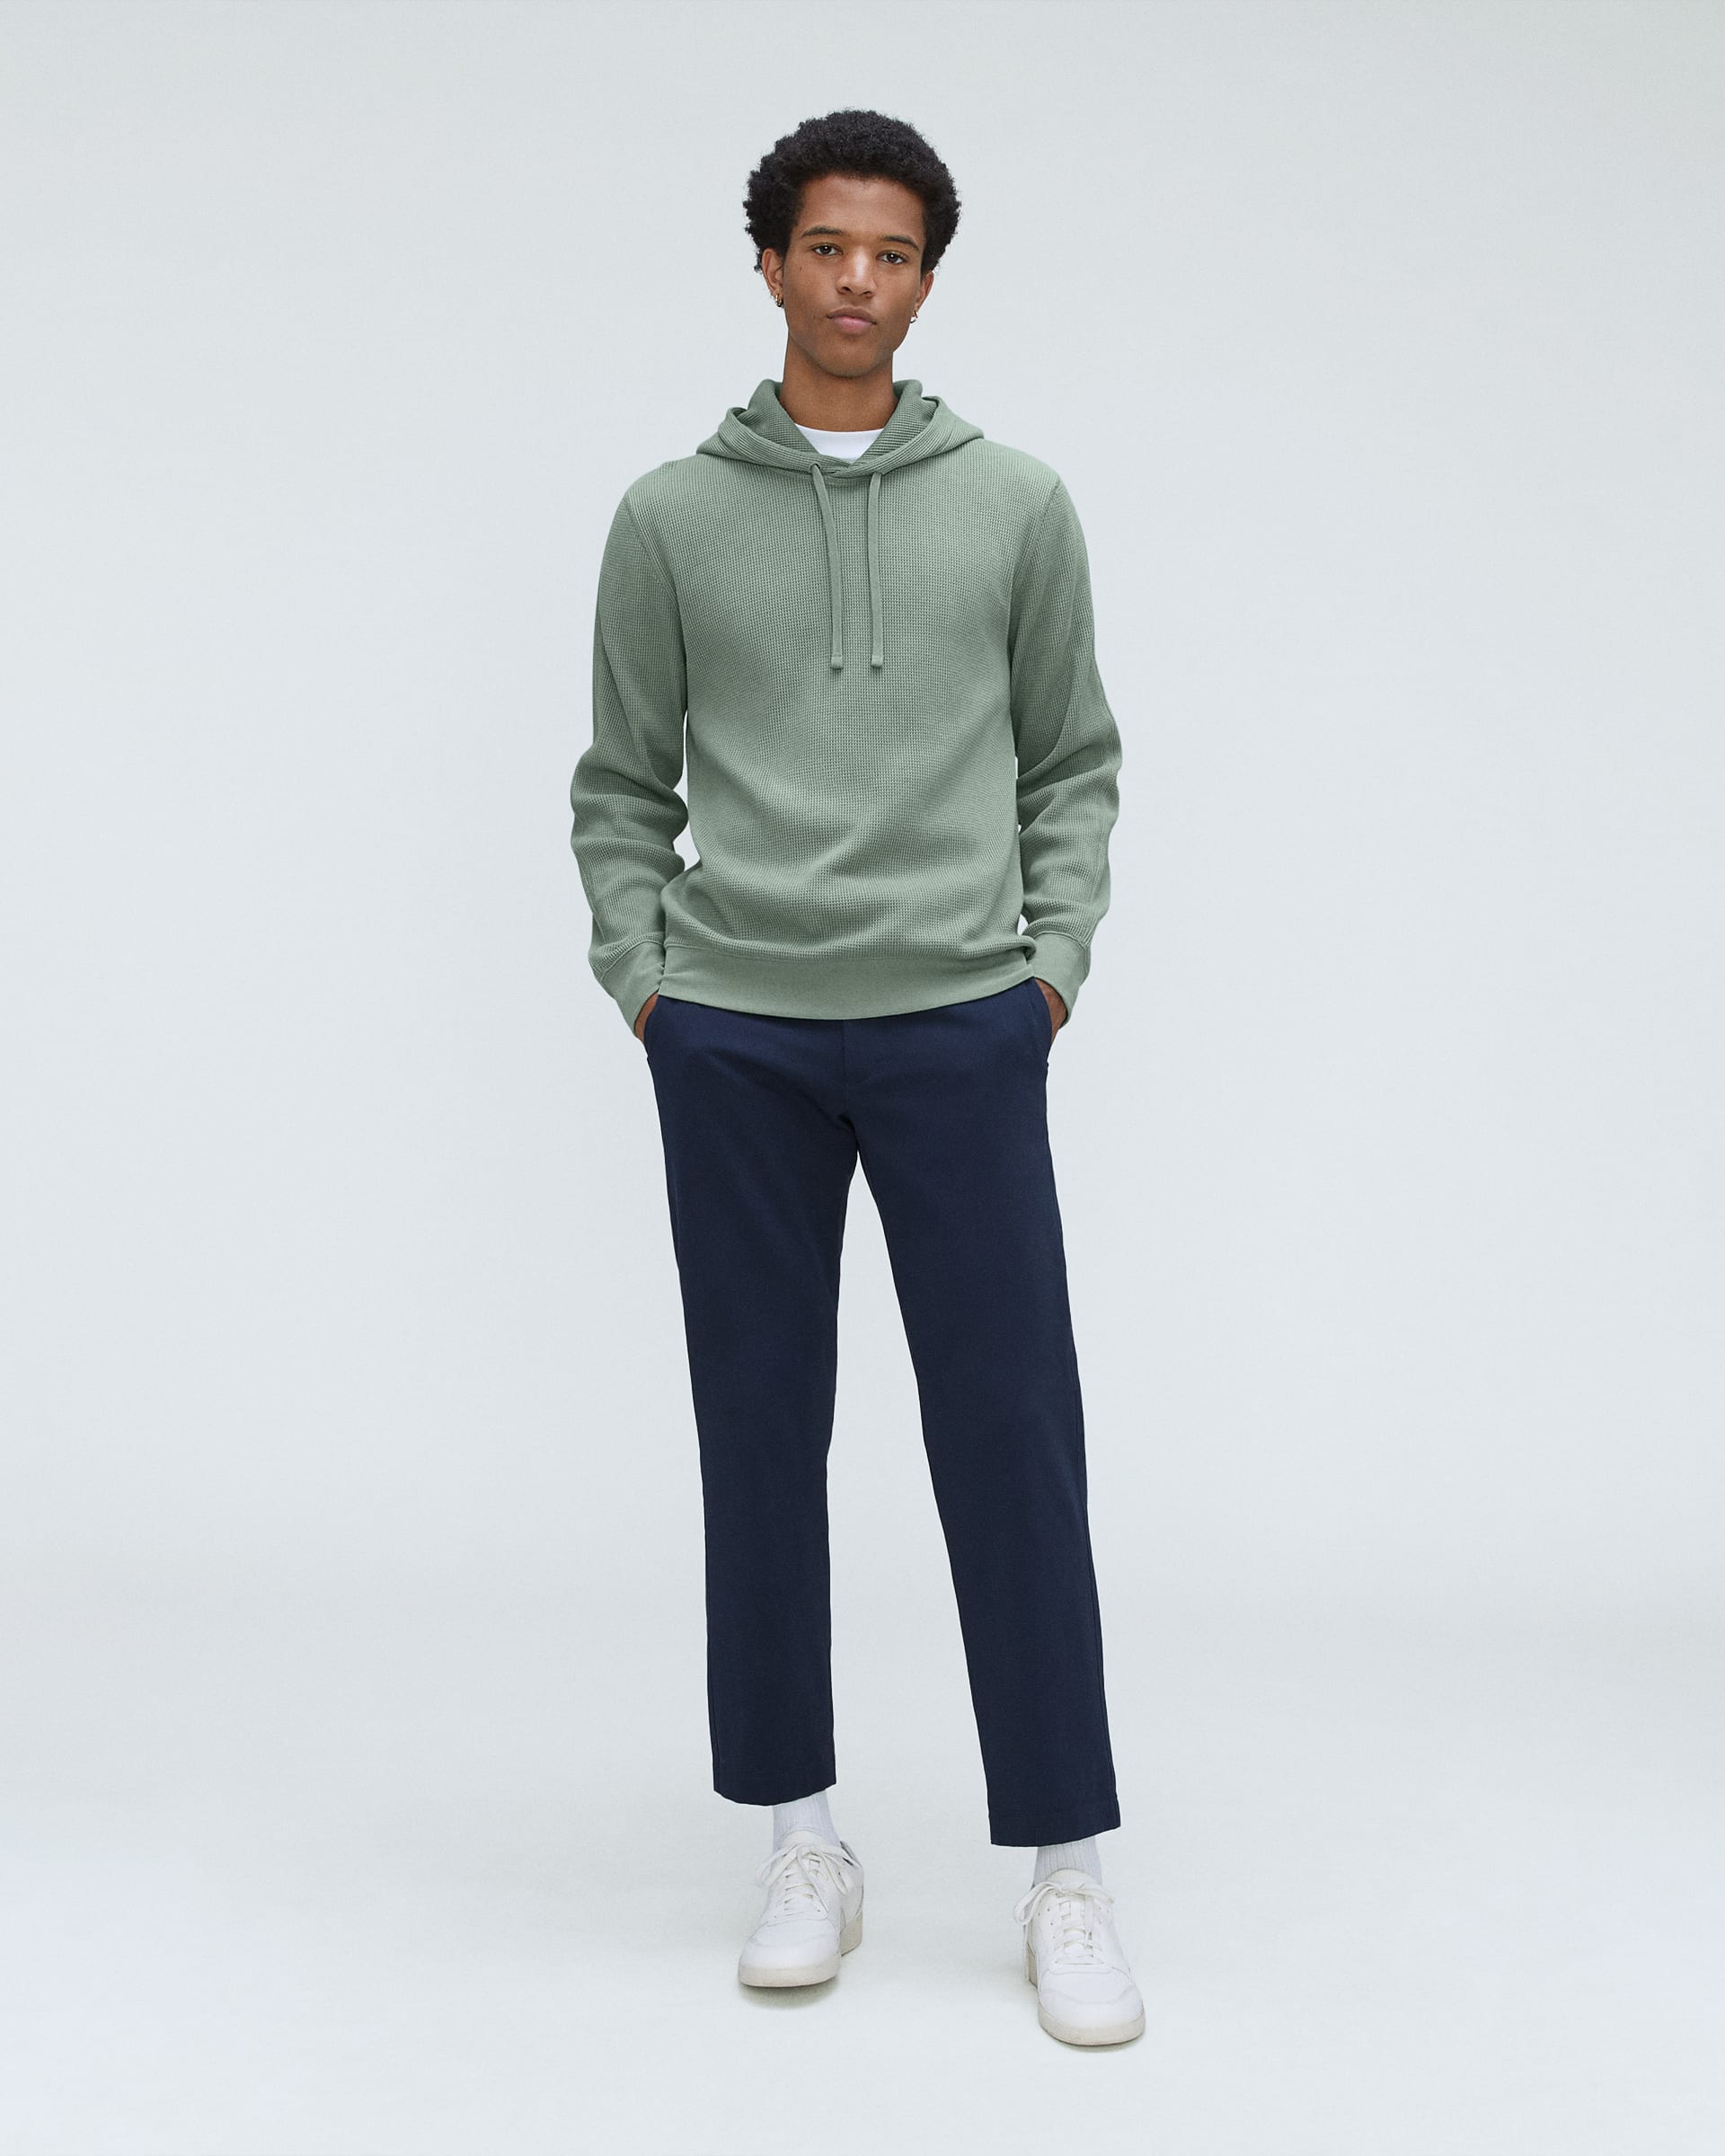 The Waffle-Knit Hoodie Lily Pad – Everlane